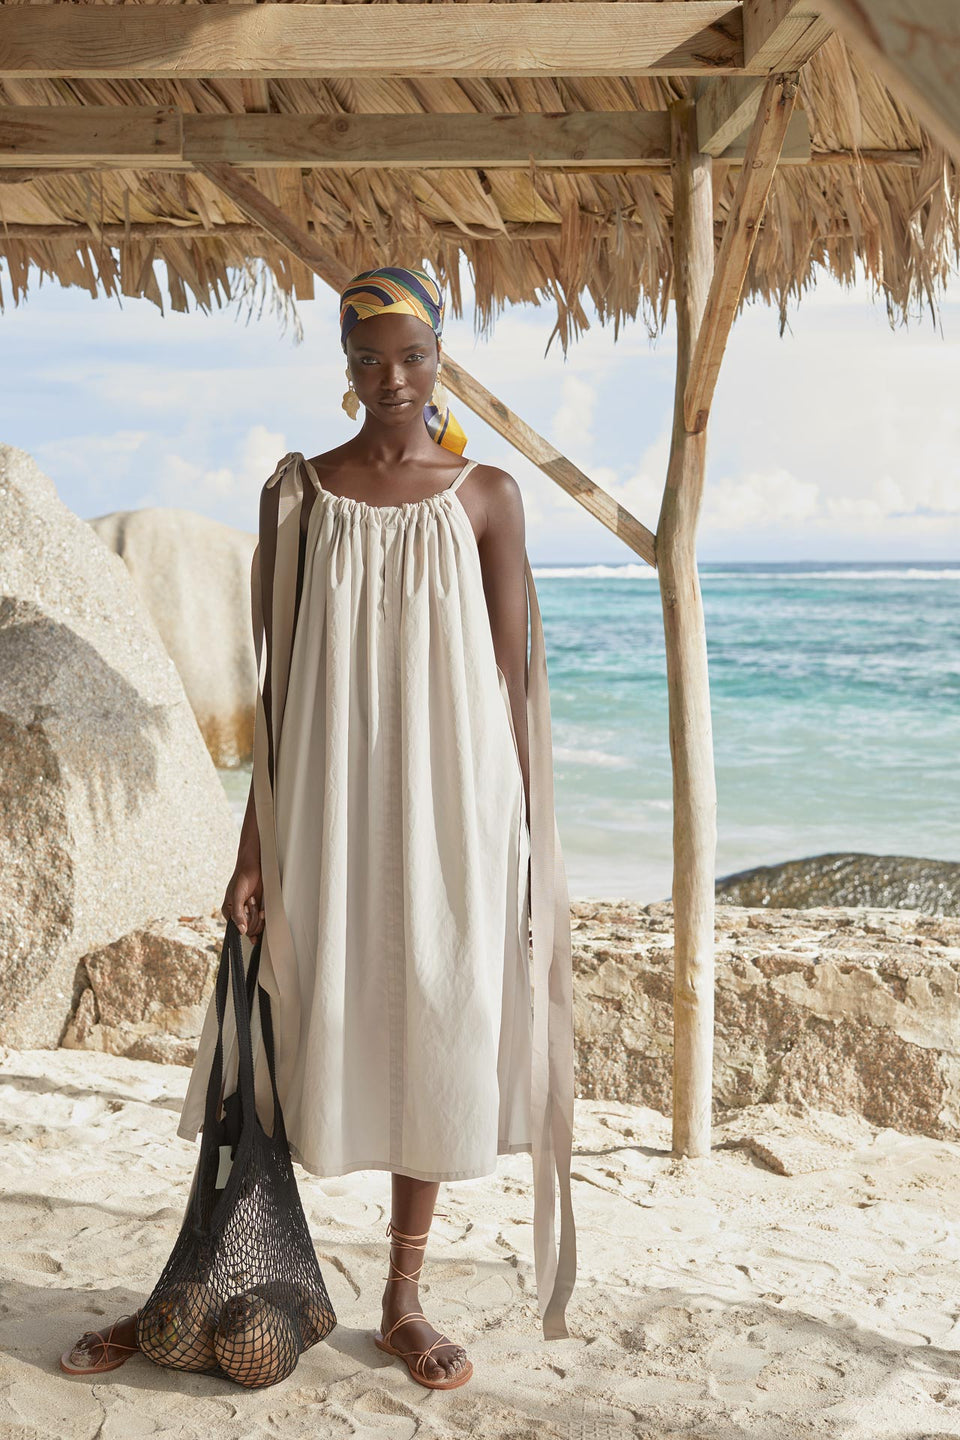 CARL KAPP SS2020 collection in Seychelles | La Digue dress